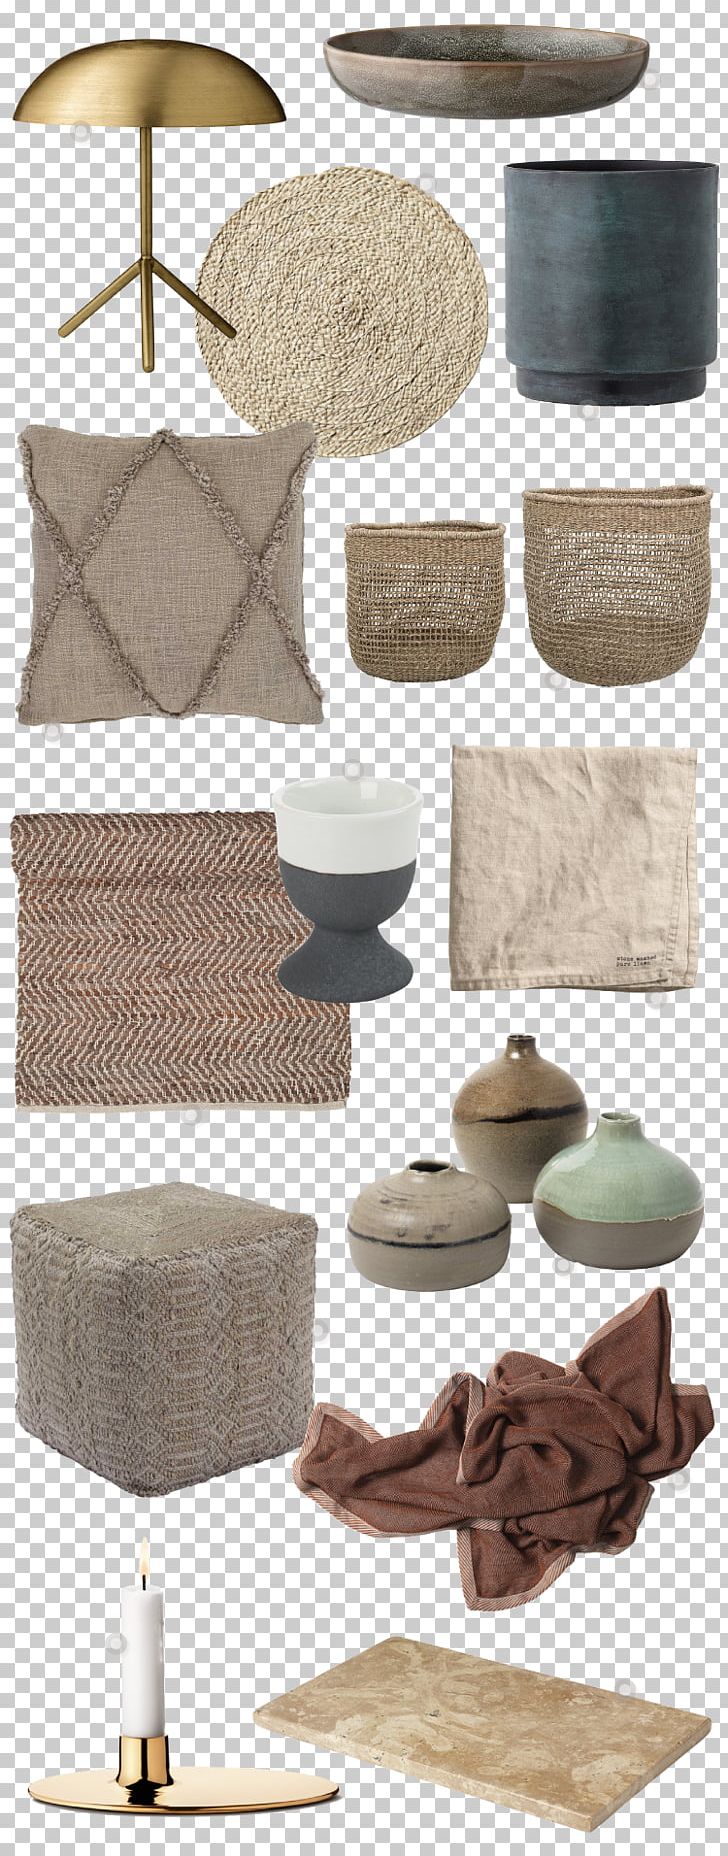 Furniture Muuto Blanket PNG, Clipart, Blanket, Furniture, Muuto, Others, Ripple Free PNG Download